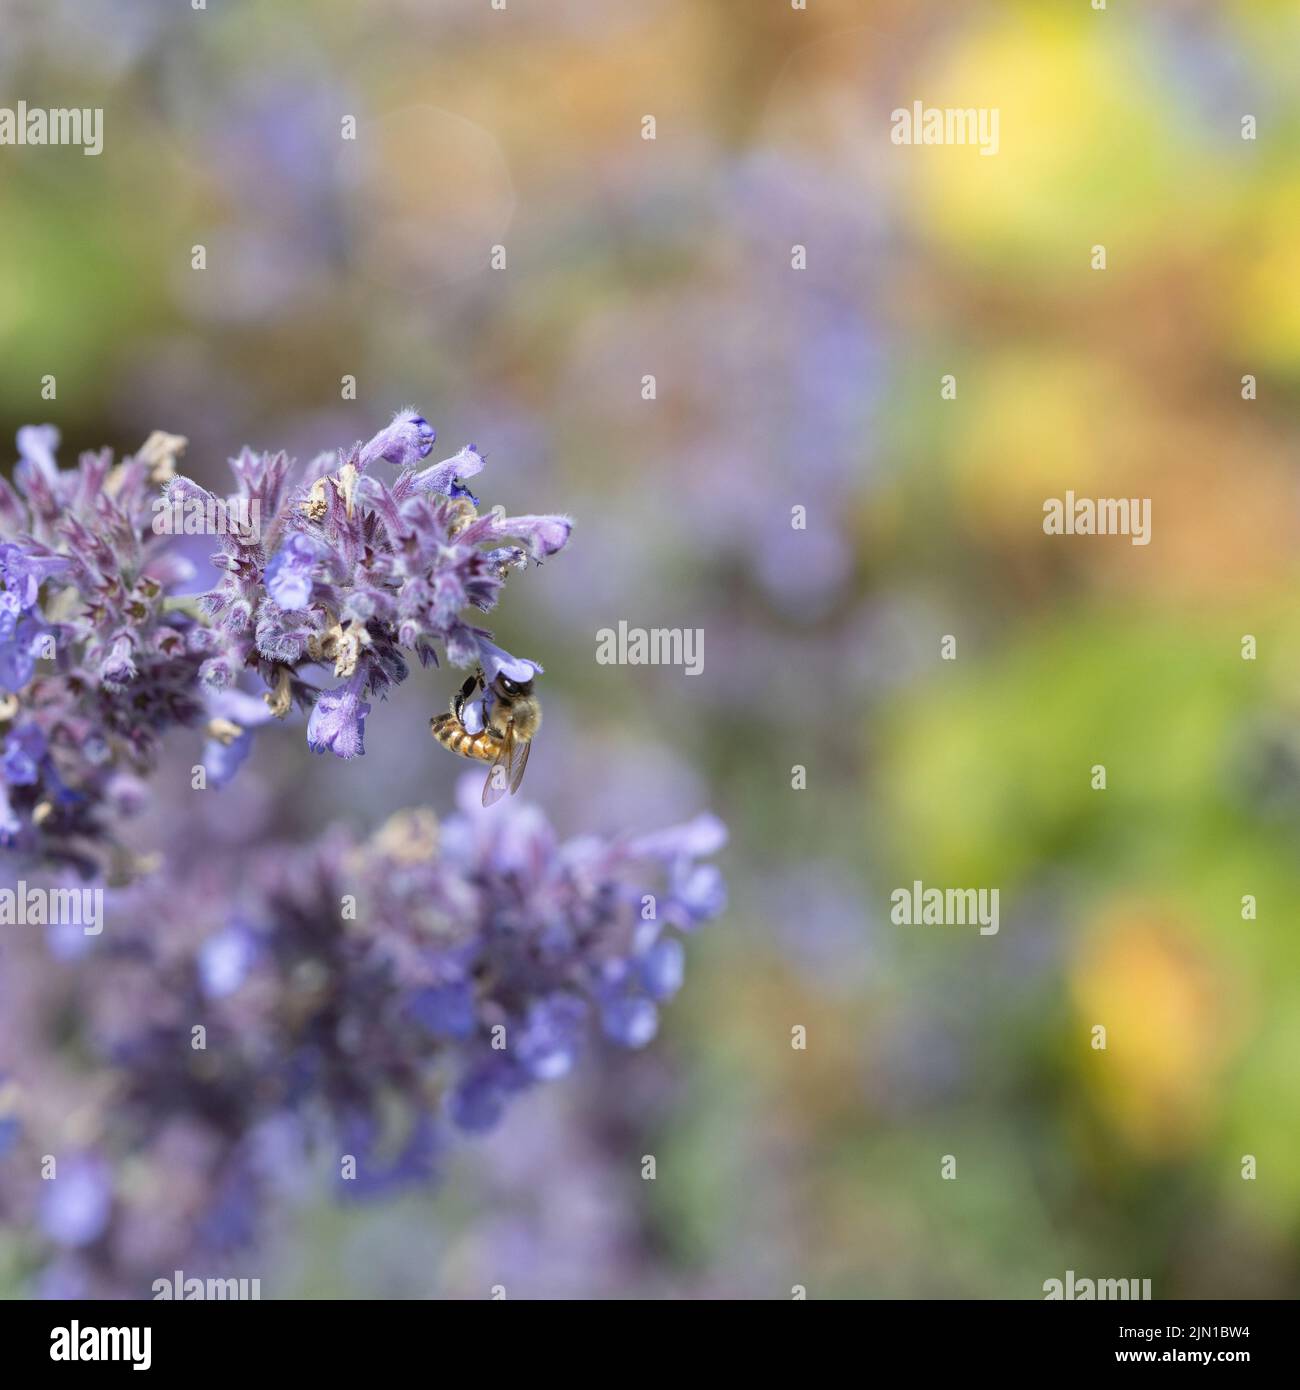 Honey bee on lavender against a colourful background Stock Photo